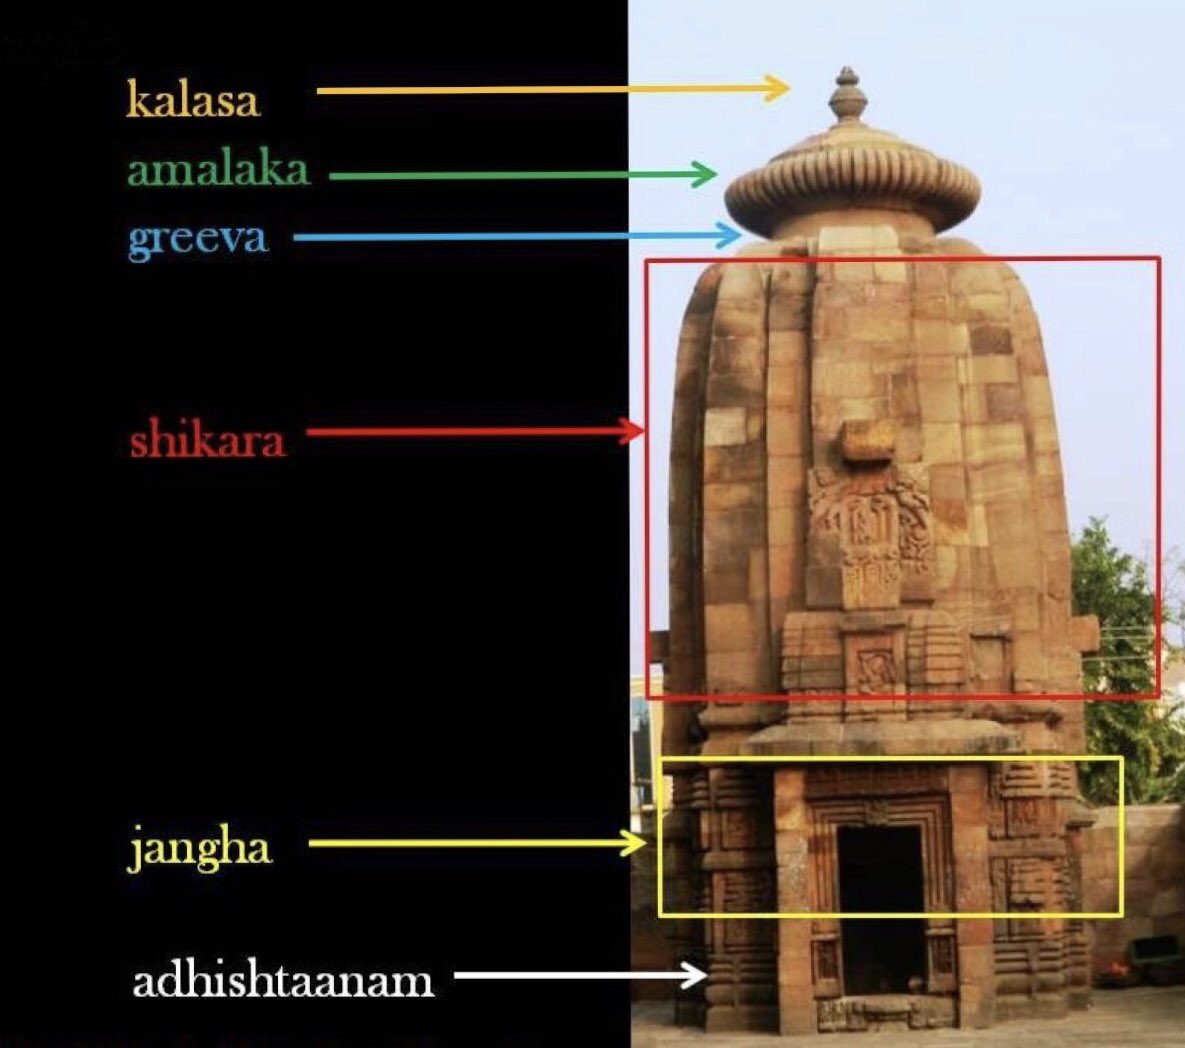 Similar names exist in Malayalam (ambalam — house), Tamil (kovil — house of ruler); Kannada (gudi — house); Odia (deula — a derivative of devaalaya) & Assamese (dol).The vimaanam may have more than one tala (level). Each tala has the same elements as the one below it, except...